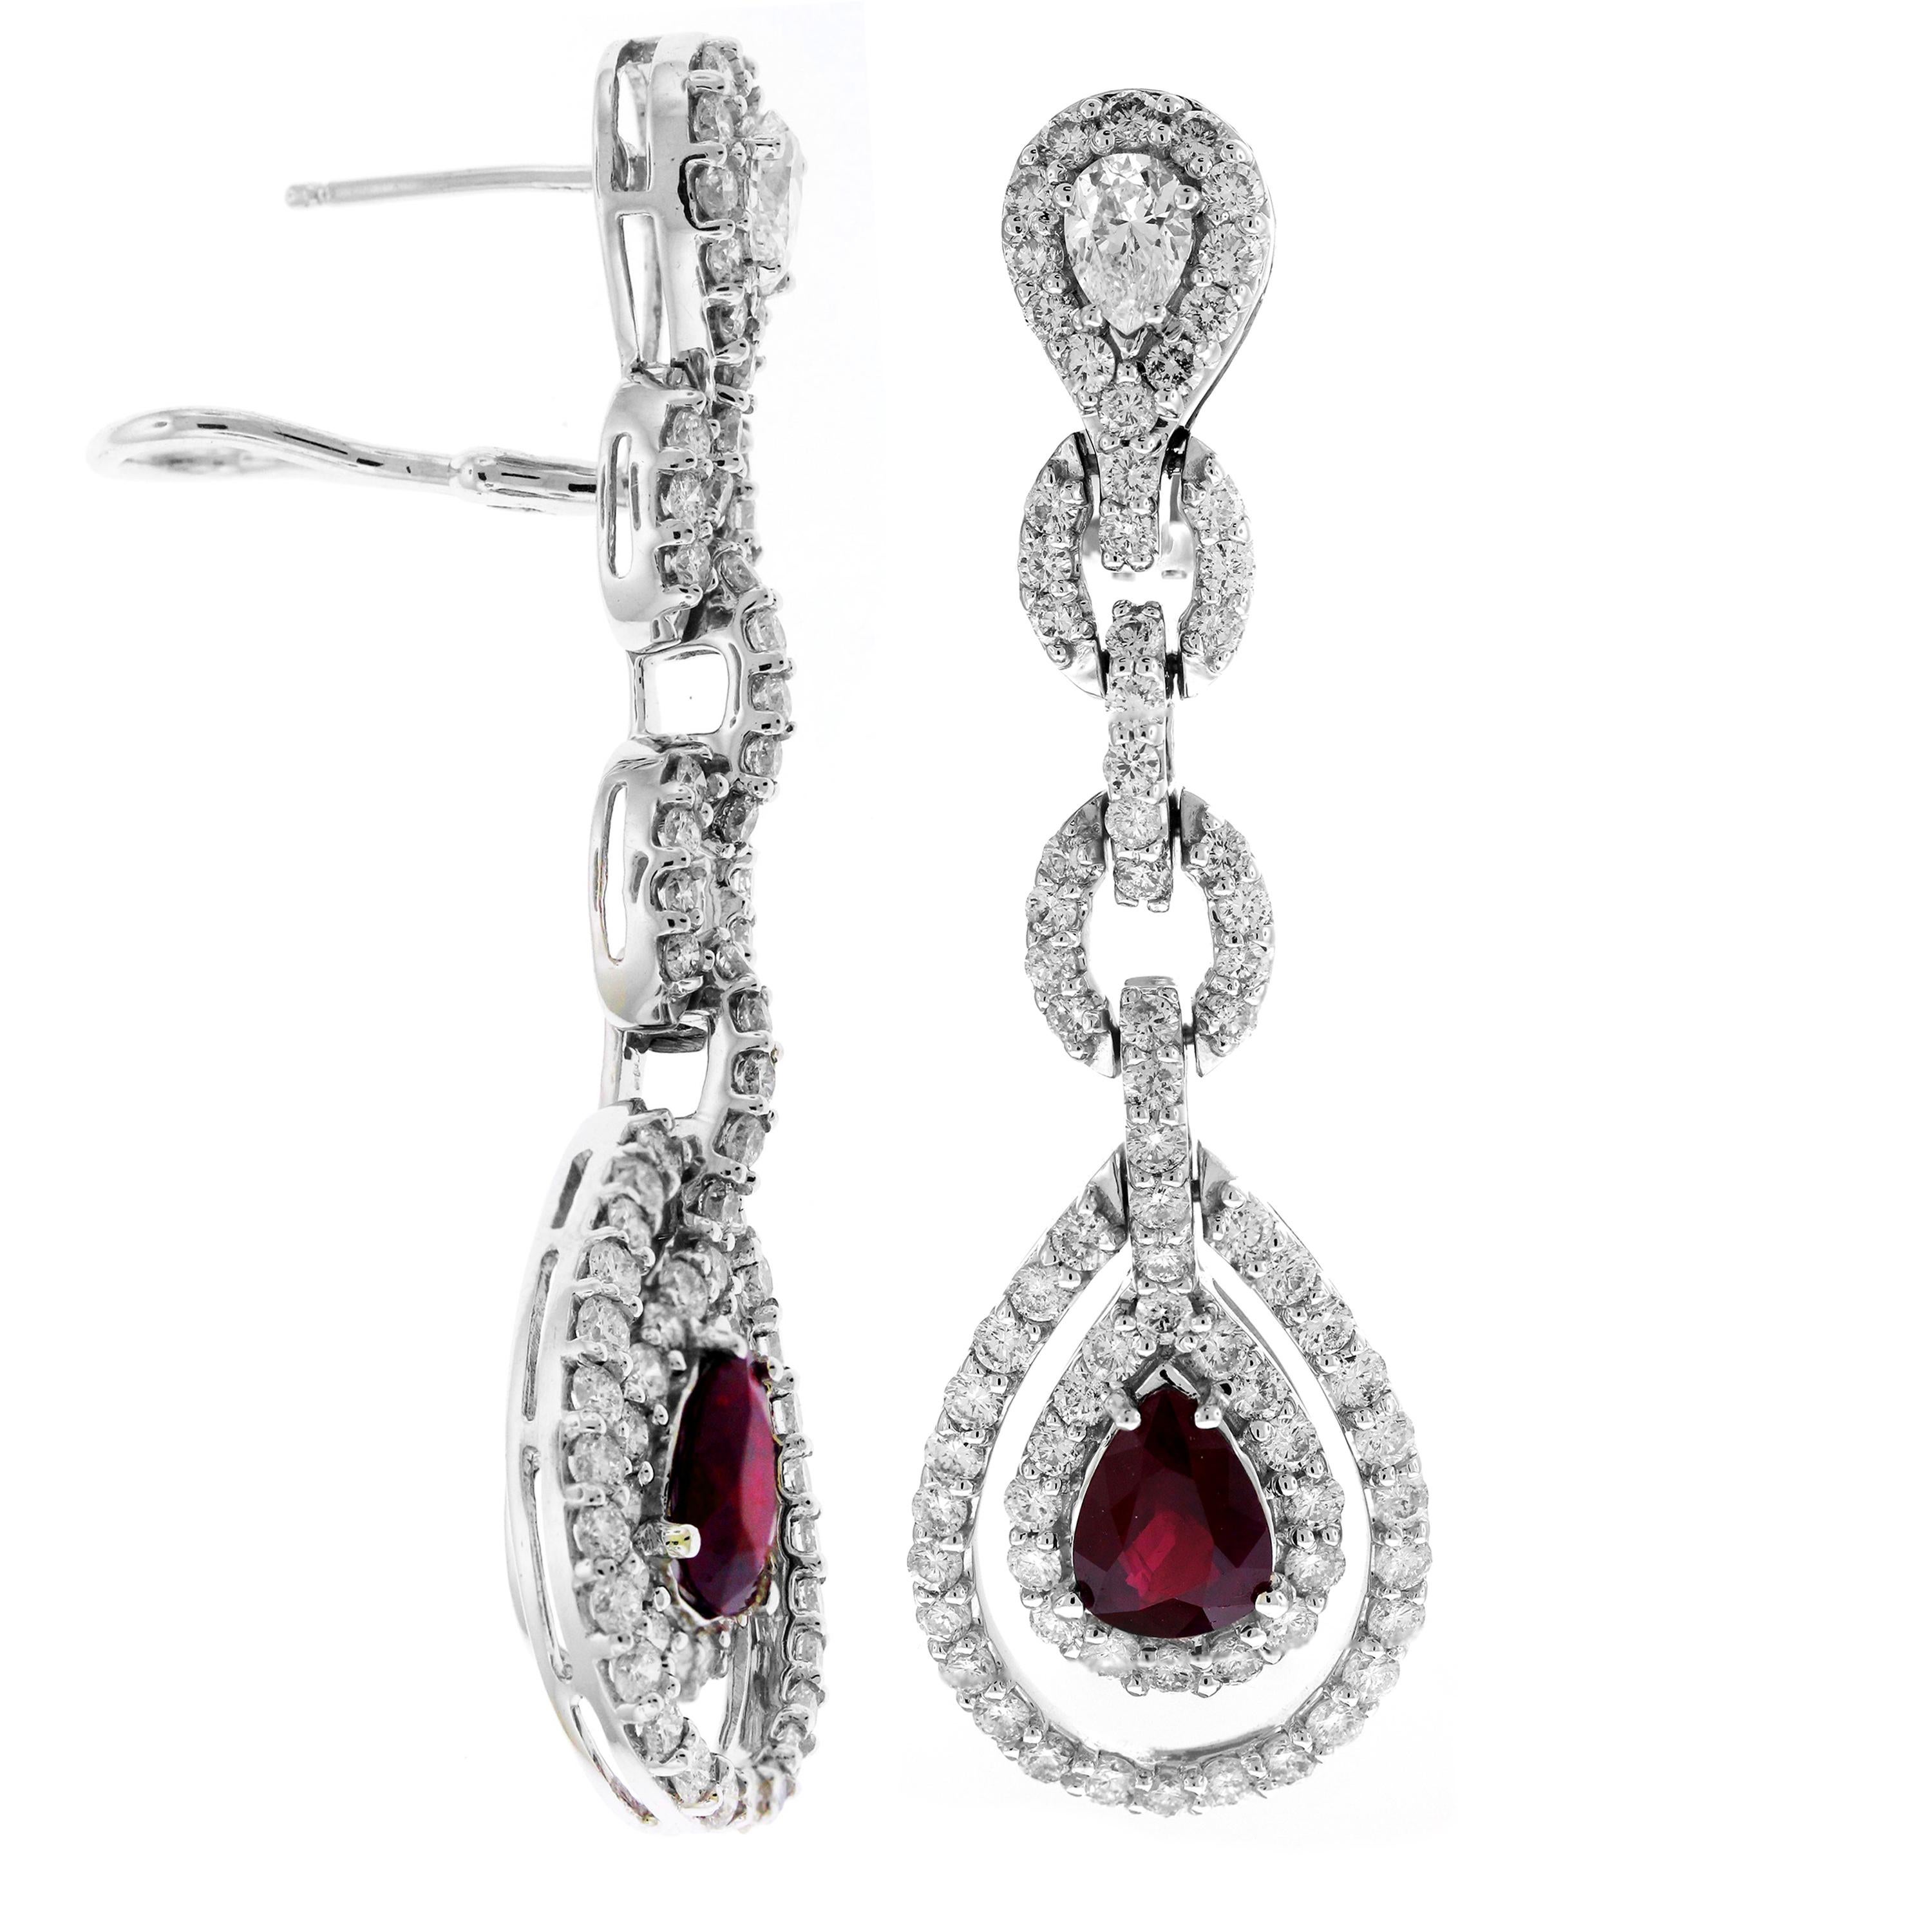 Pear Shape Ruby and Diamond 18 Karat White Gold Drop Dangle Earrings

3 carat approximate pear shape Rubies

6.25 carat G color, VS clarity white diamonds

Earrings measure 2.3 inches in length x 0.7 inch width

Post omega backs for security

Made